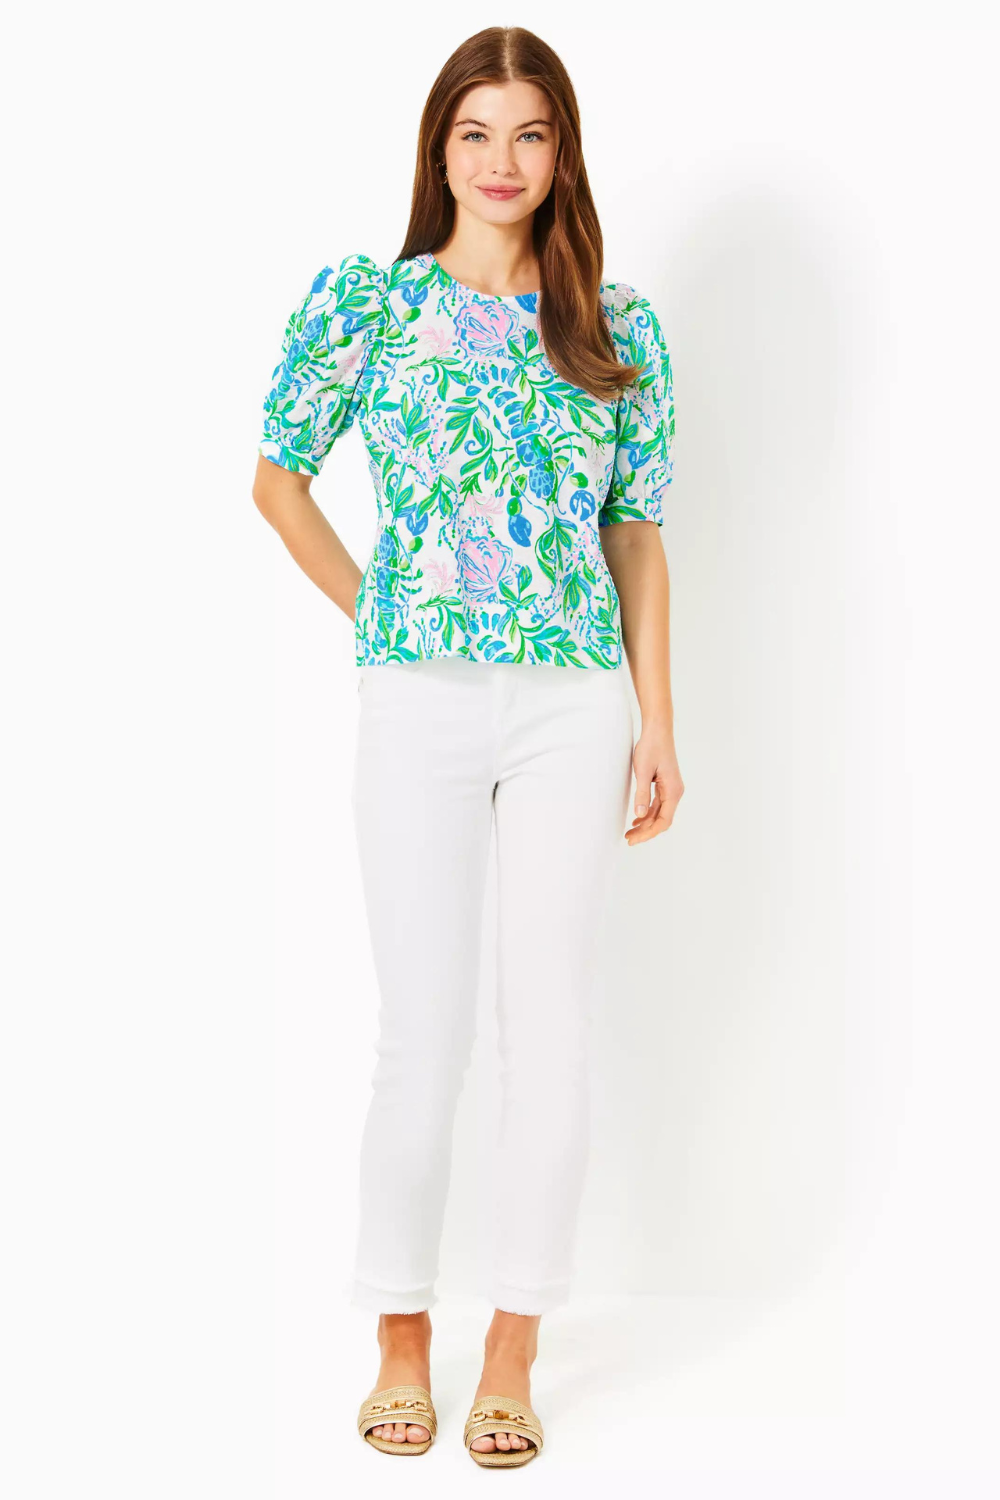 Lilly Pulitzer Masieleigh Short Sleeve Top - Just a Pinch